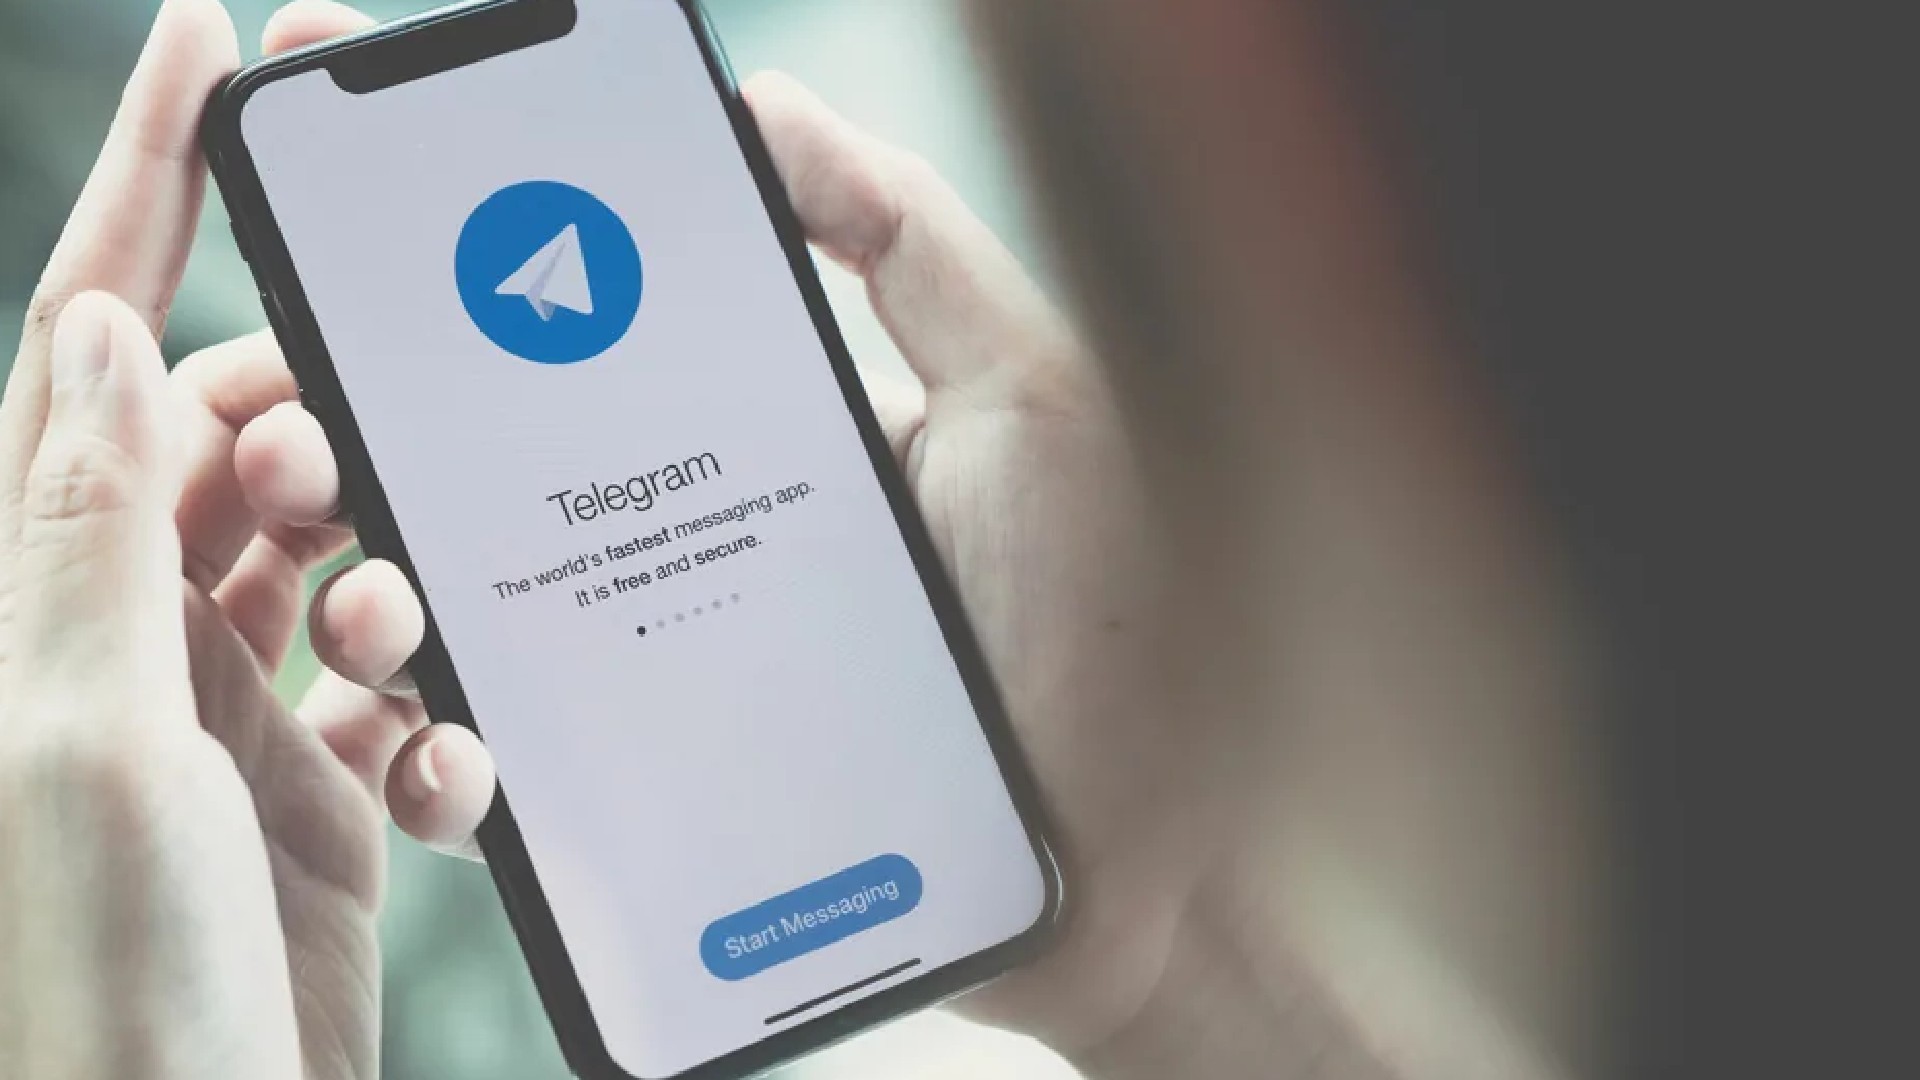 Oops: Telegram is blocked in Brazil because it didn’t check its emails